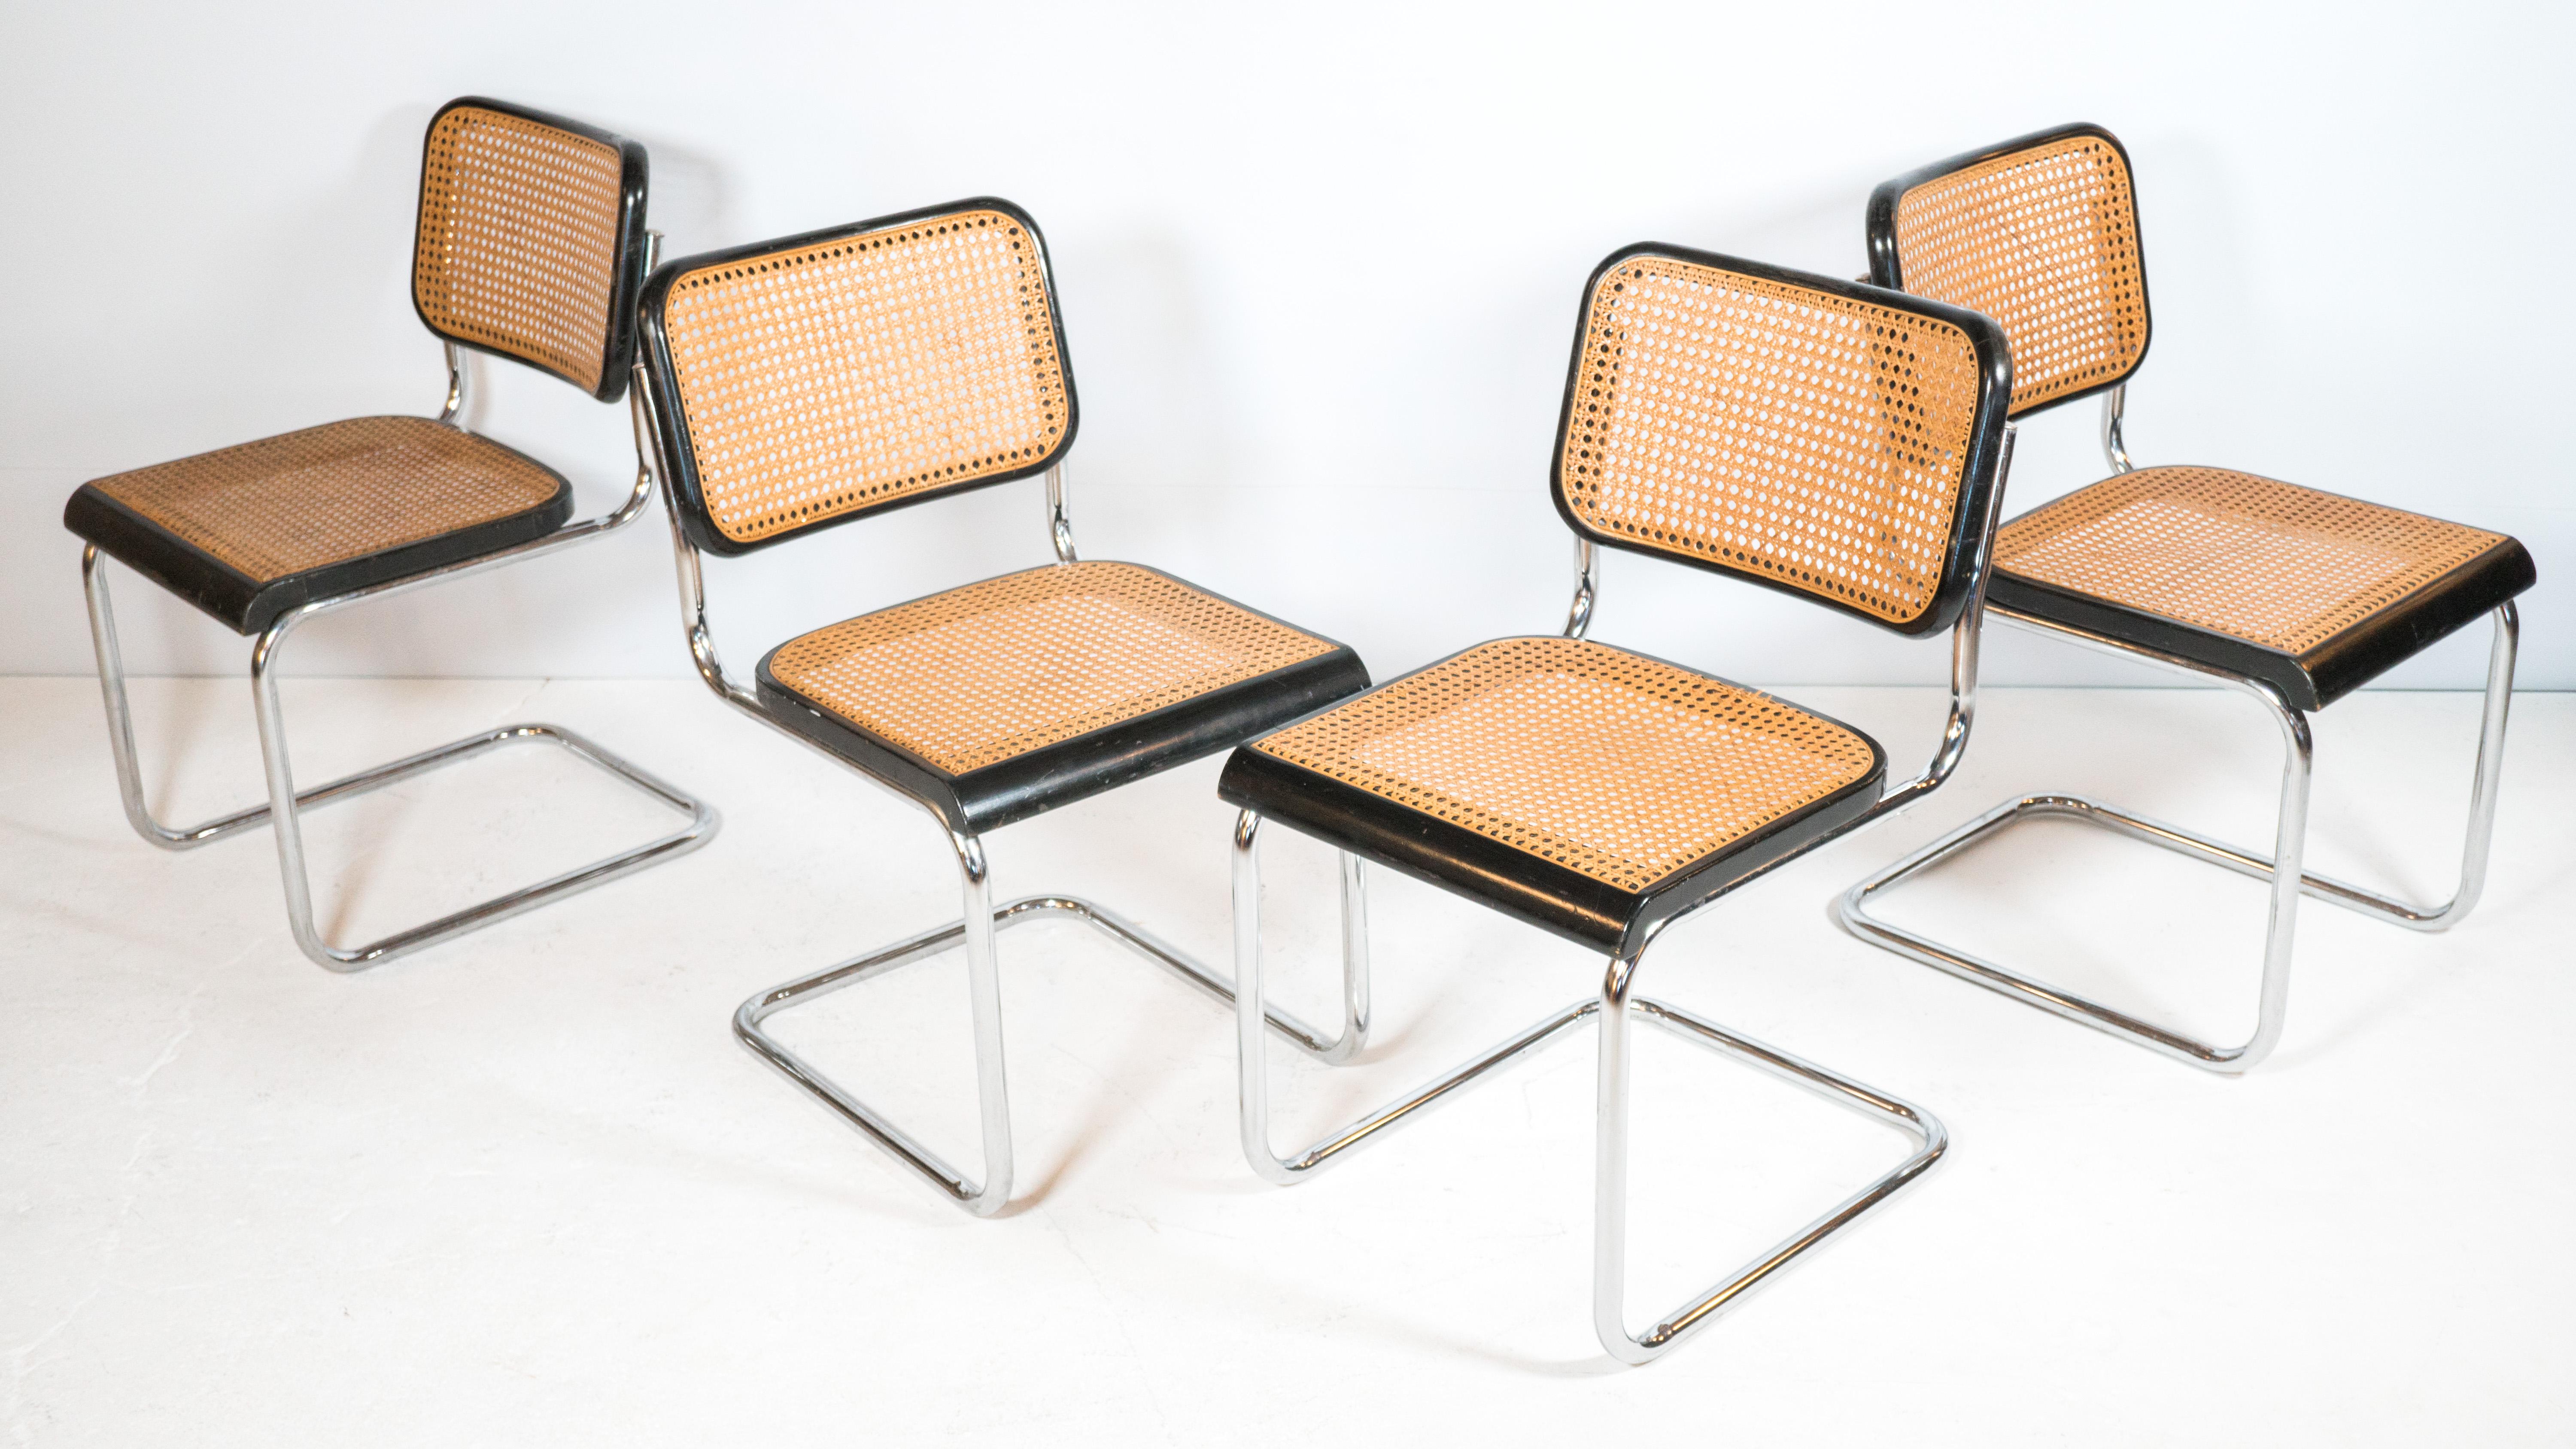 Polish 1960s Vintage Marcel Breuer Attributed. Cesca Dining Chairs by Gfm - Set of 4 For Sale